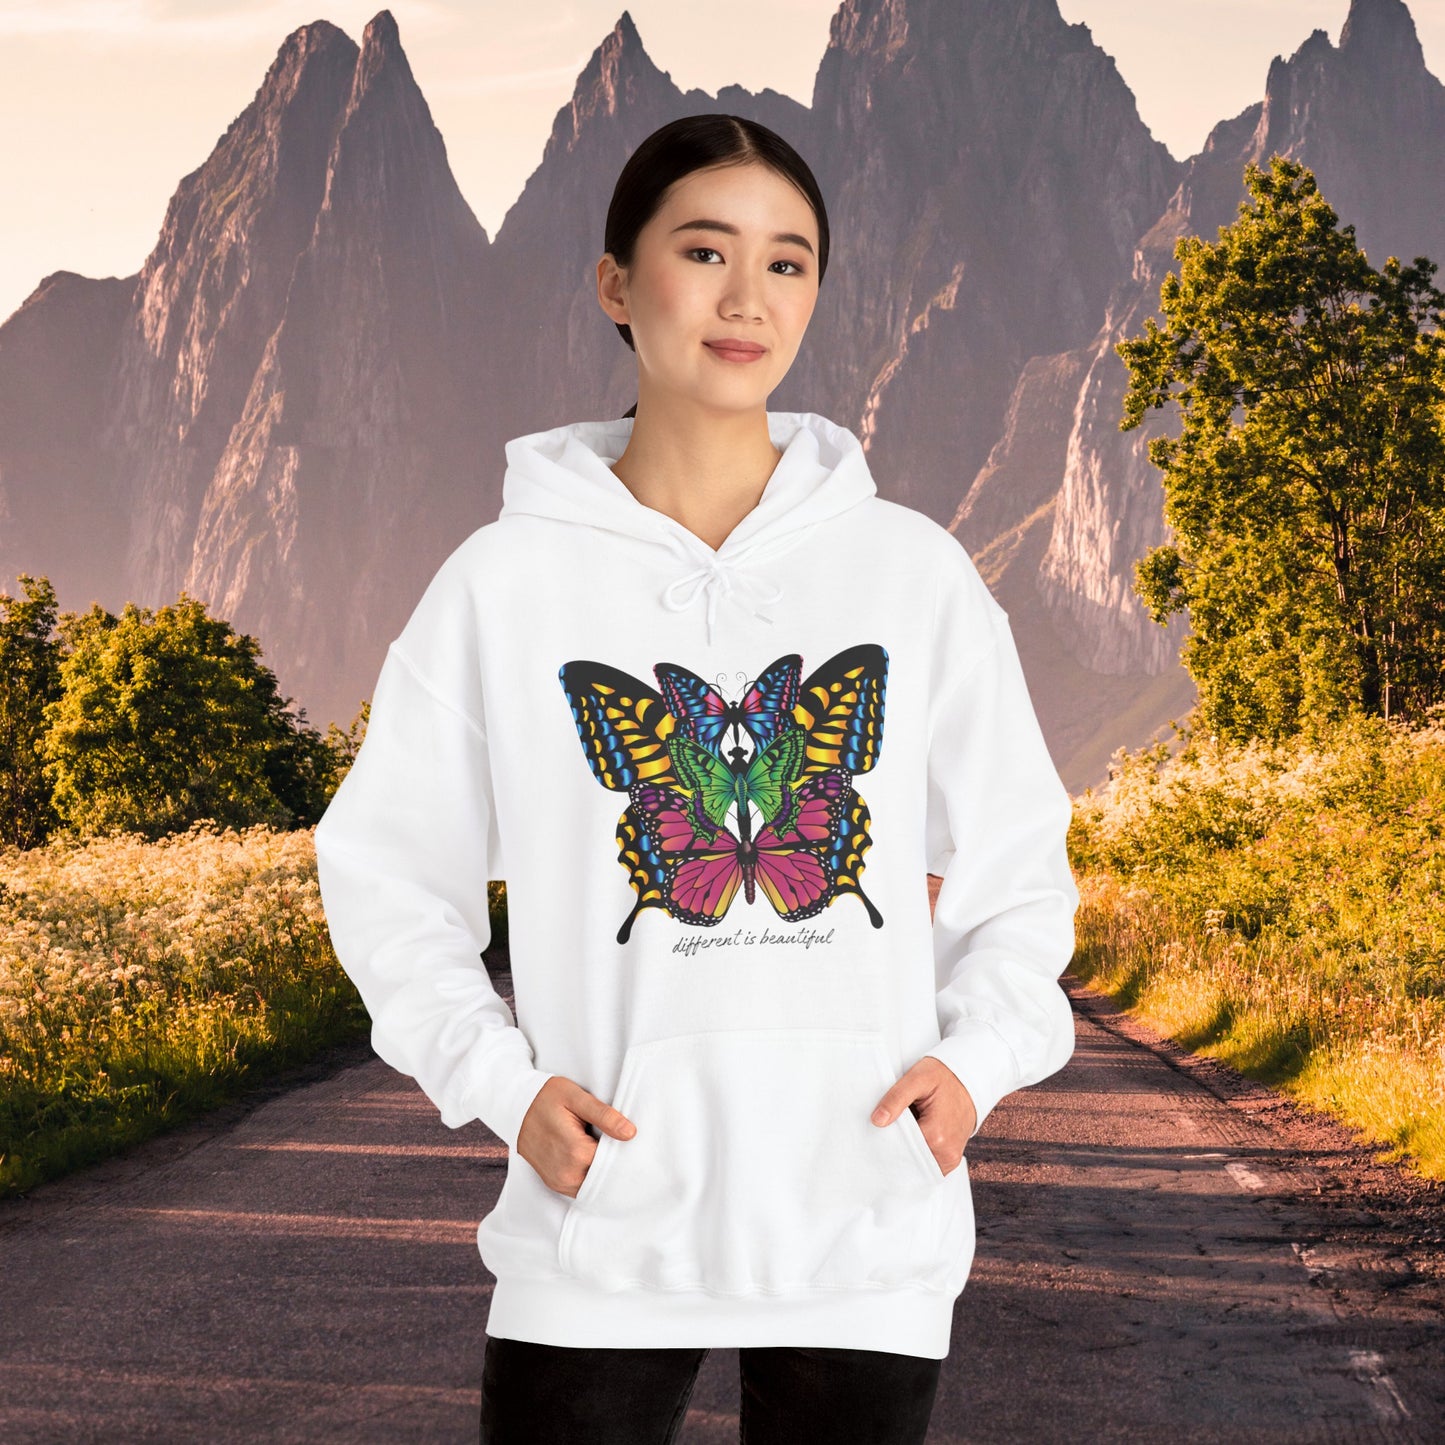 Diversity is celebrated on this butterflies filled “different is beautiful" Unisex Heavy Blend™ Hooded Sweatshirt